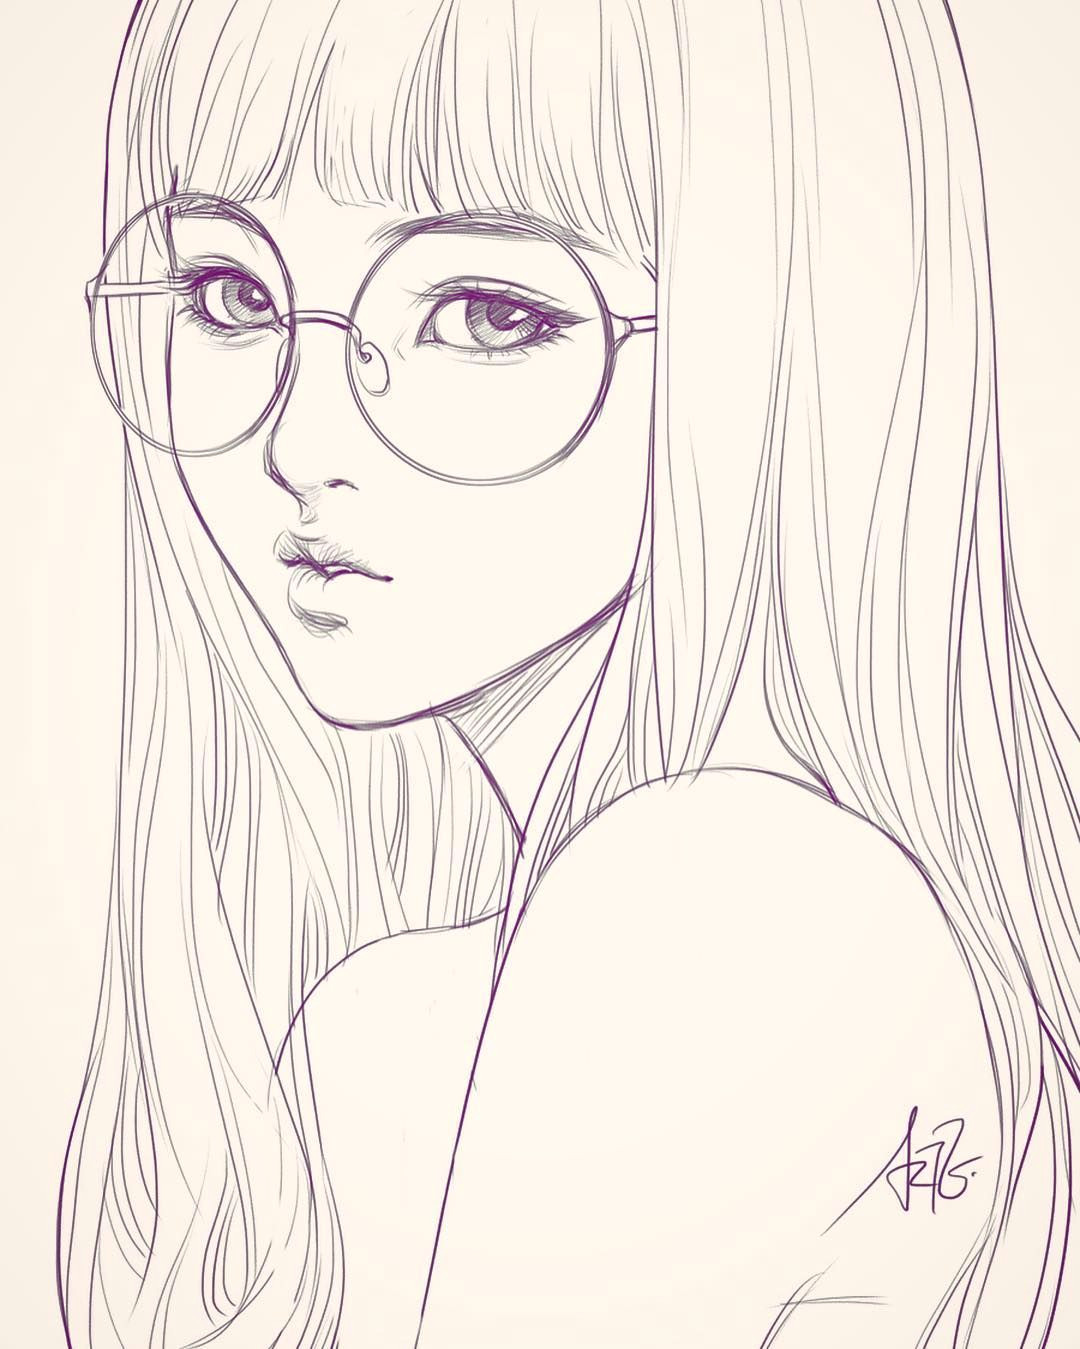 Drawing Anime Live Stream Last Sketch Of Girl with Glasses Having Bad Backache It Hurts